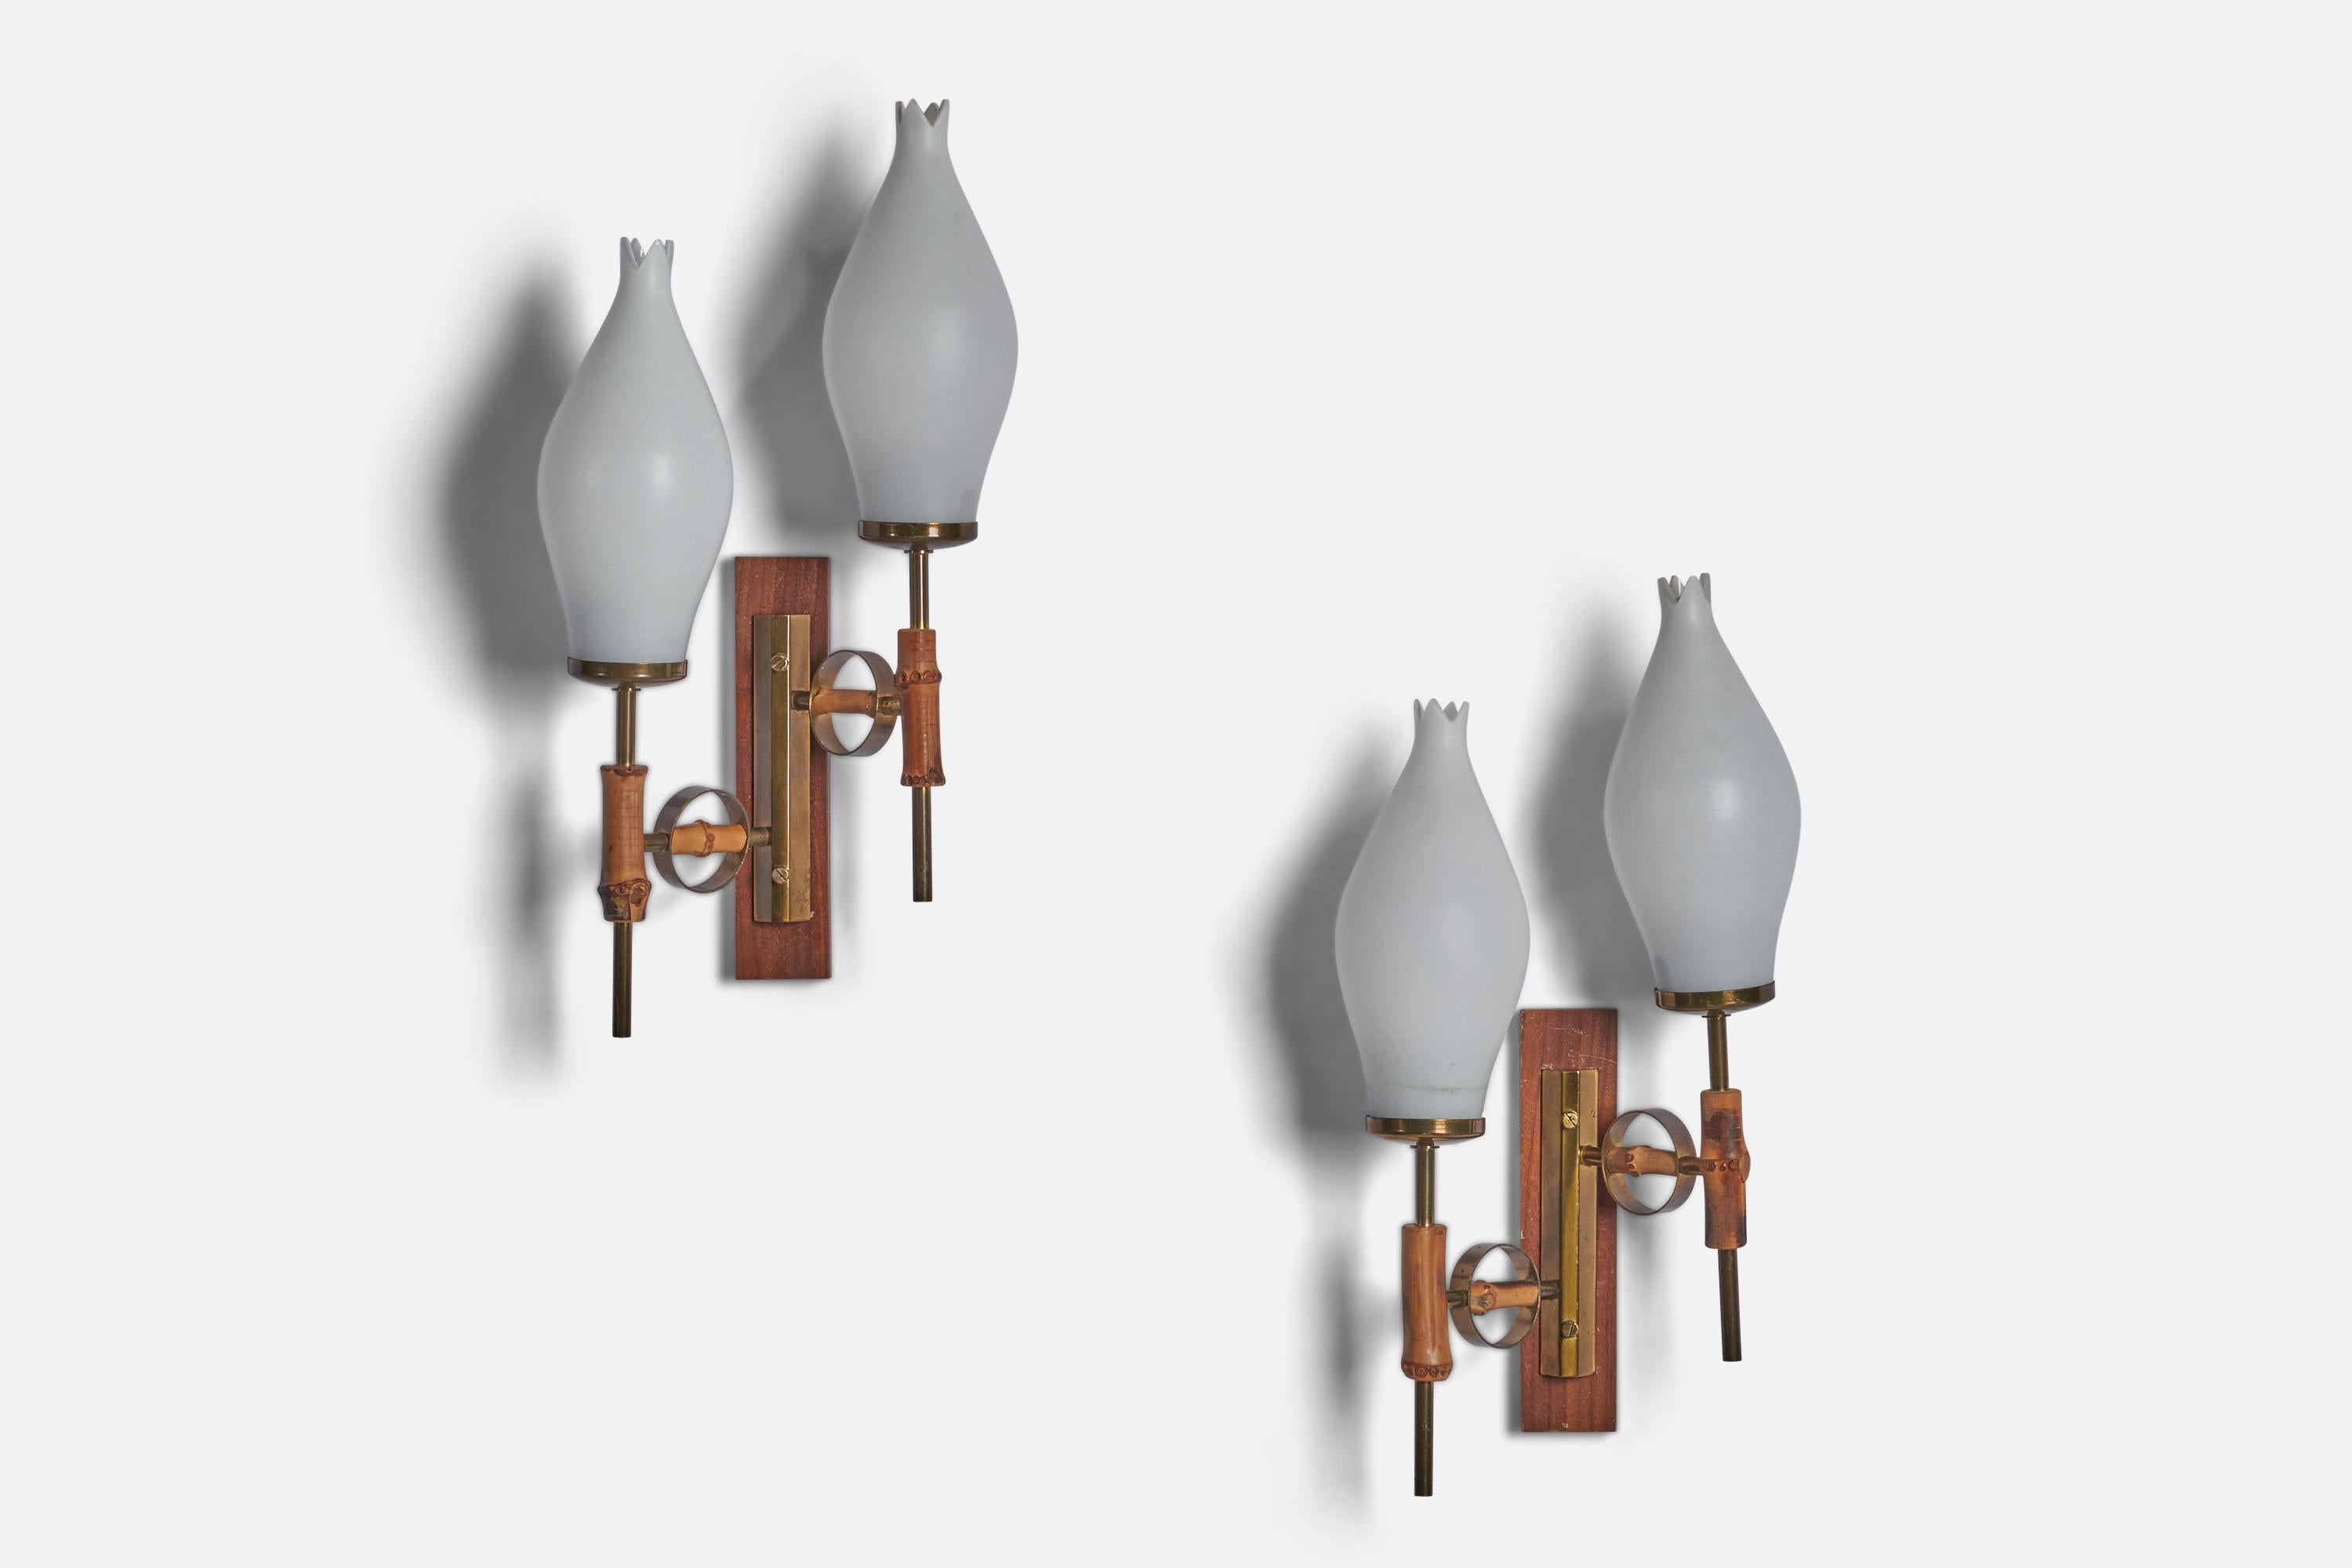 A pair of two-armed brass, bamboo, opaline glass and teak wall lights designed and produced in Italy, 1950s.

Overall Dimensions (inches): 14.75” H x 7.75” W x 4” D
Back Plate Dimensions (inches): 6.75” H x 1.5” W x 0.5” D
Bulb Specifications: E-14